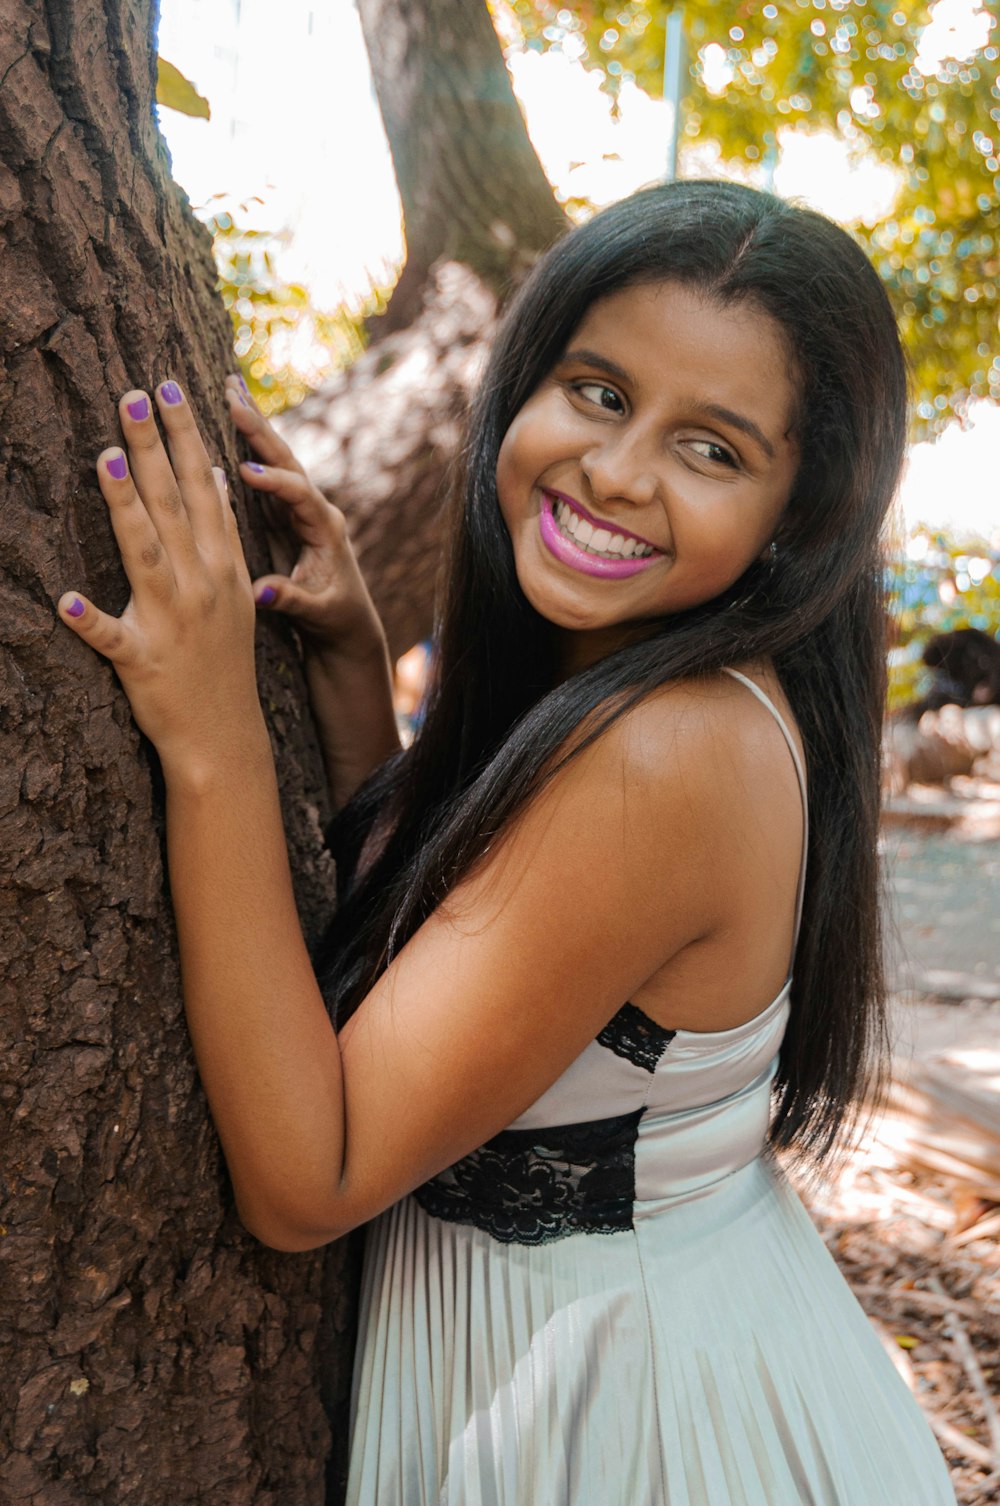 a girl in a white dress leans against a tree